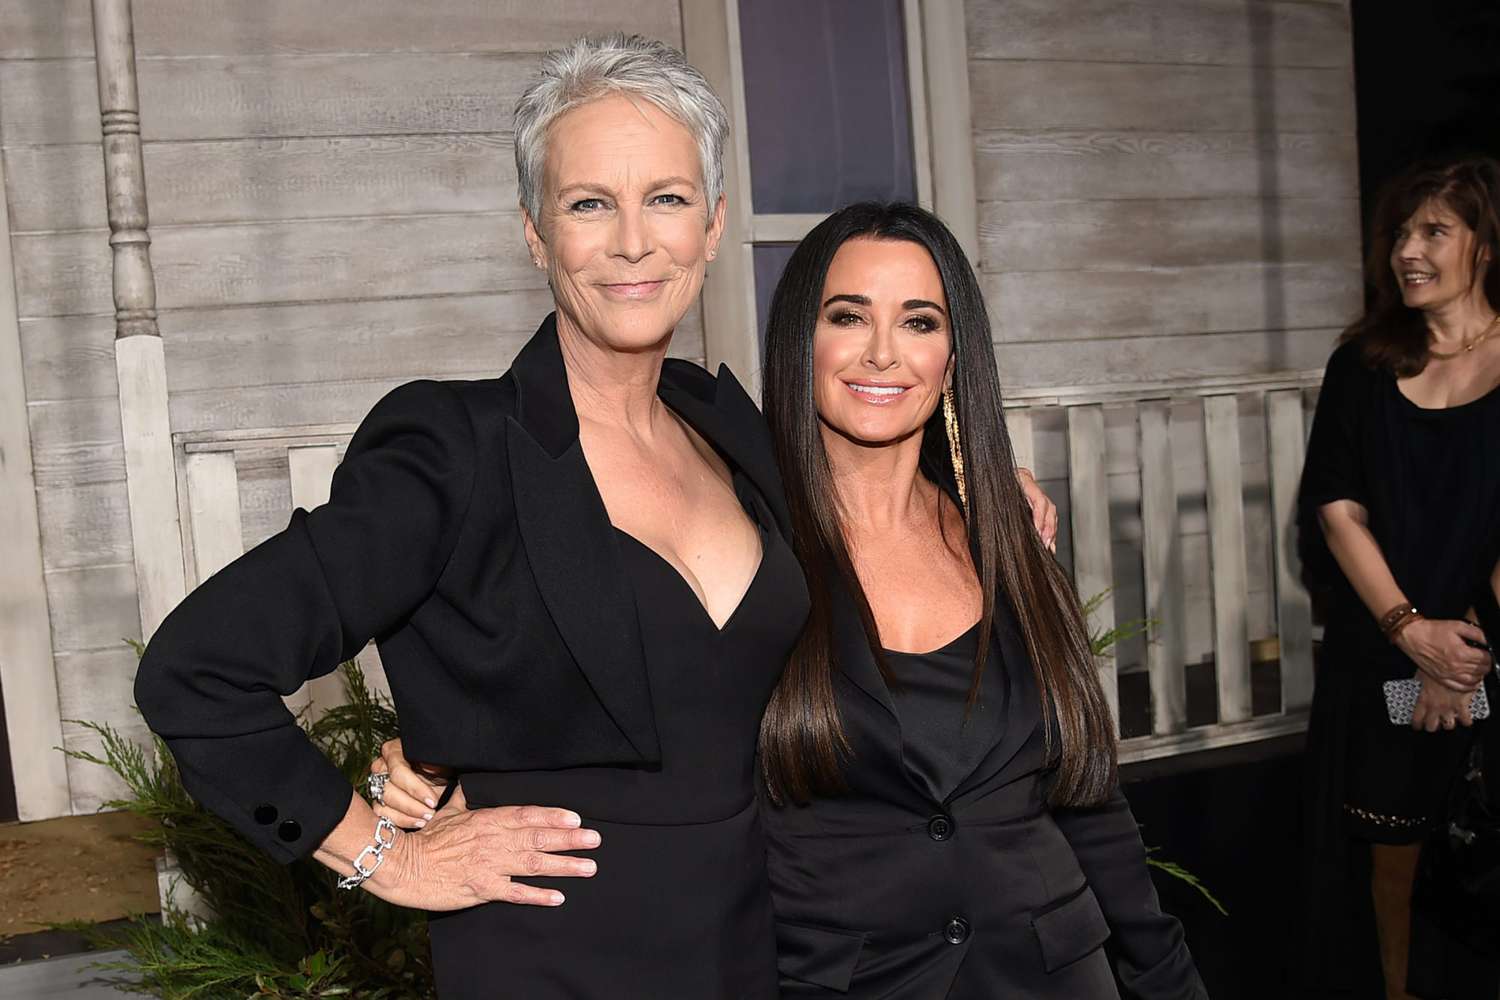 Jamie Lee Curtis (L) and Kyle Richards attend the Universal Pictures' "Halloween" premiere at TCL Chinese Theatre on October 17, 2018 in Hollywood, California